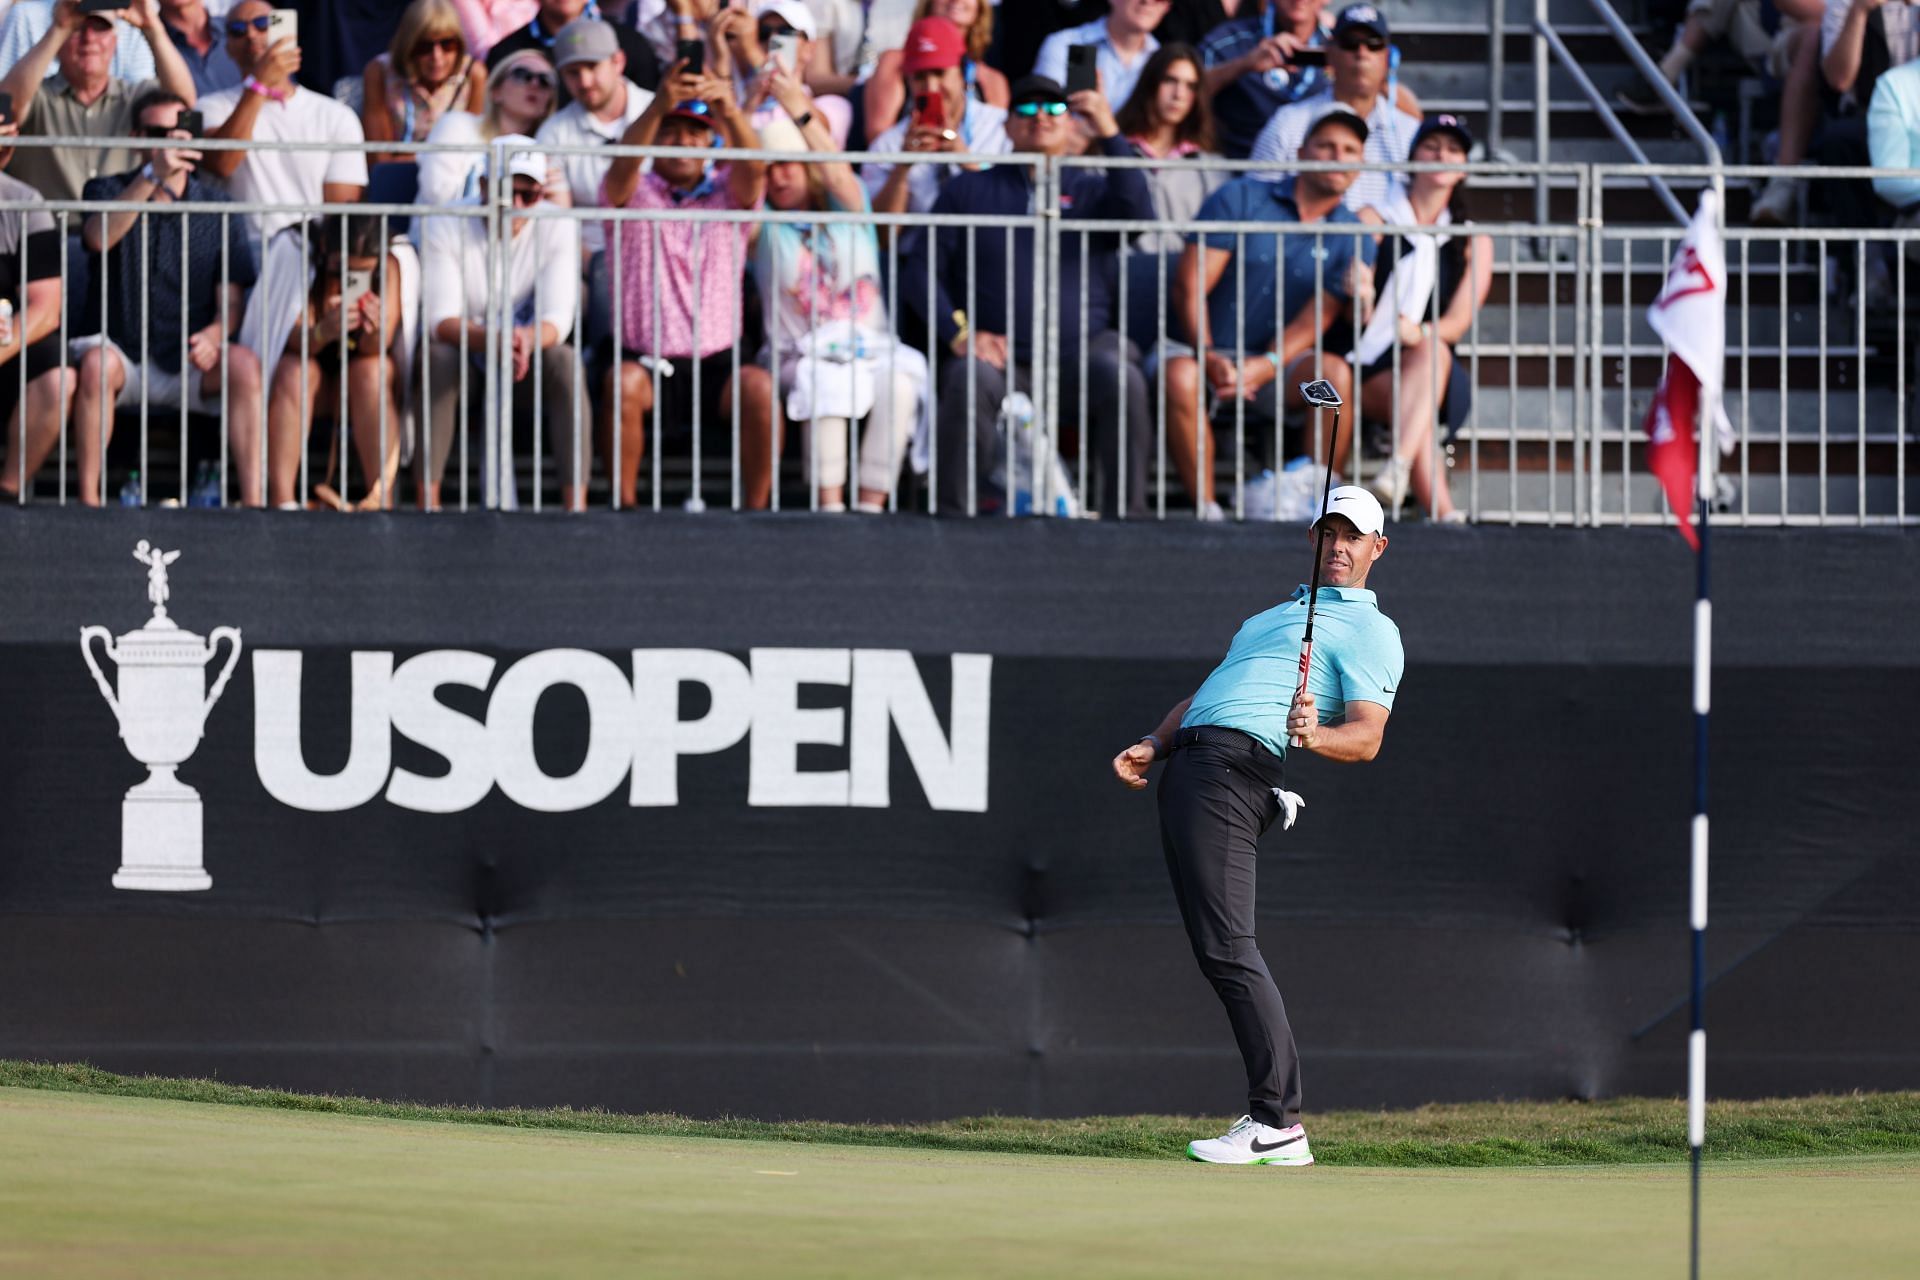 Rory McIlroy at the 123rd US Open Championship (via Getty Images)